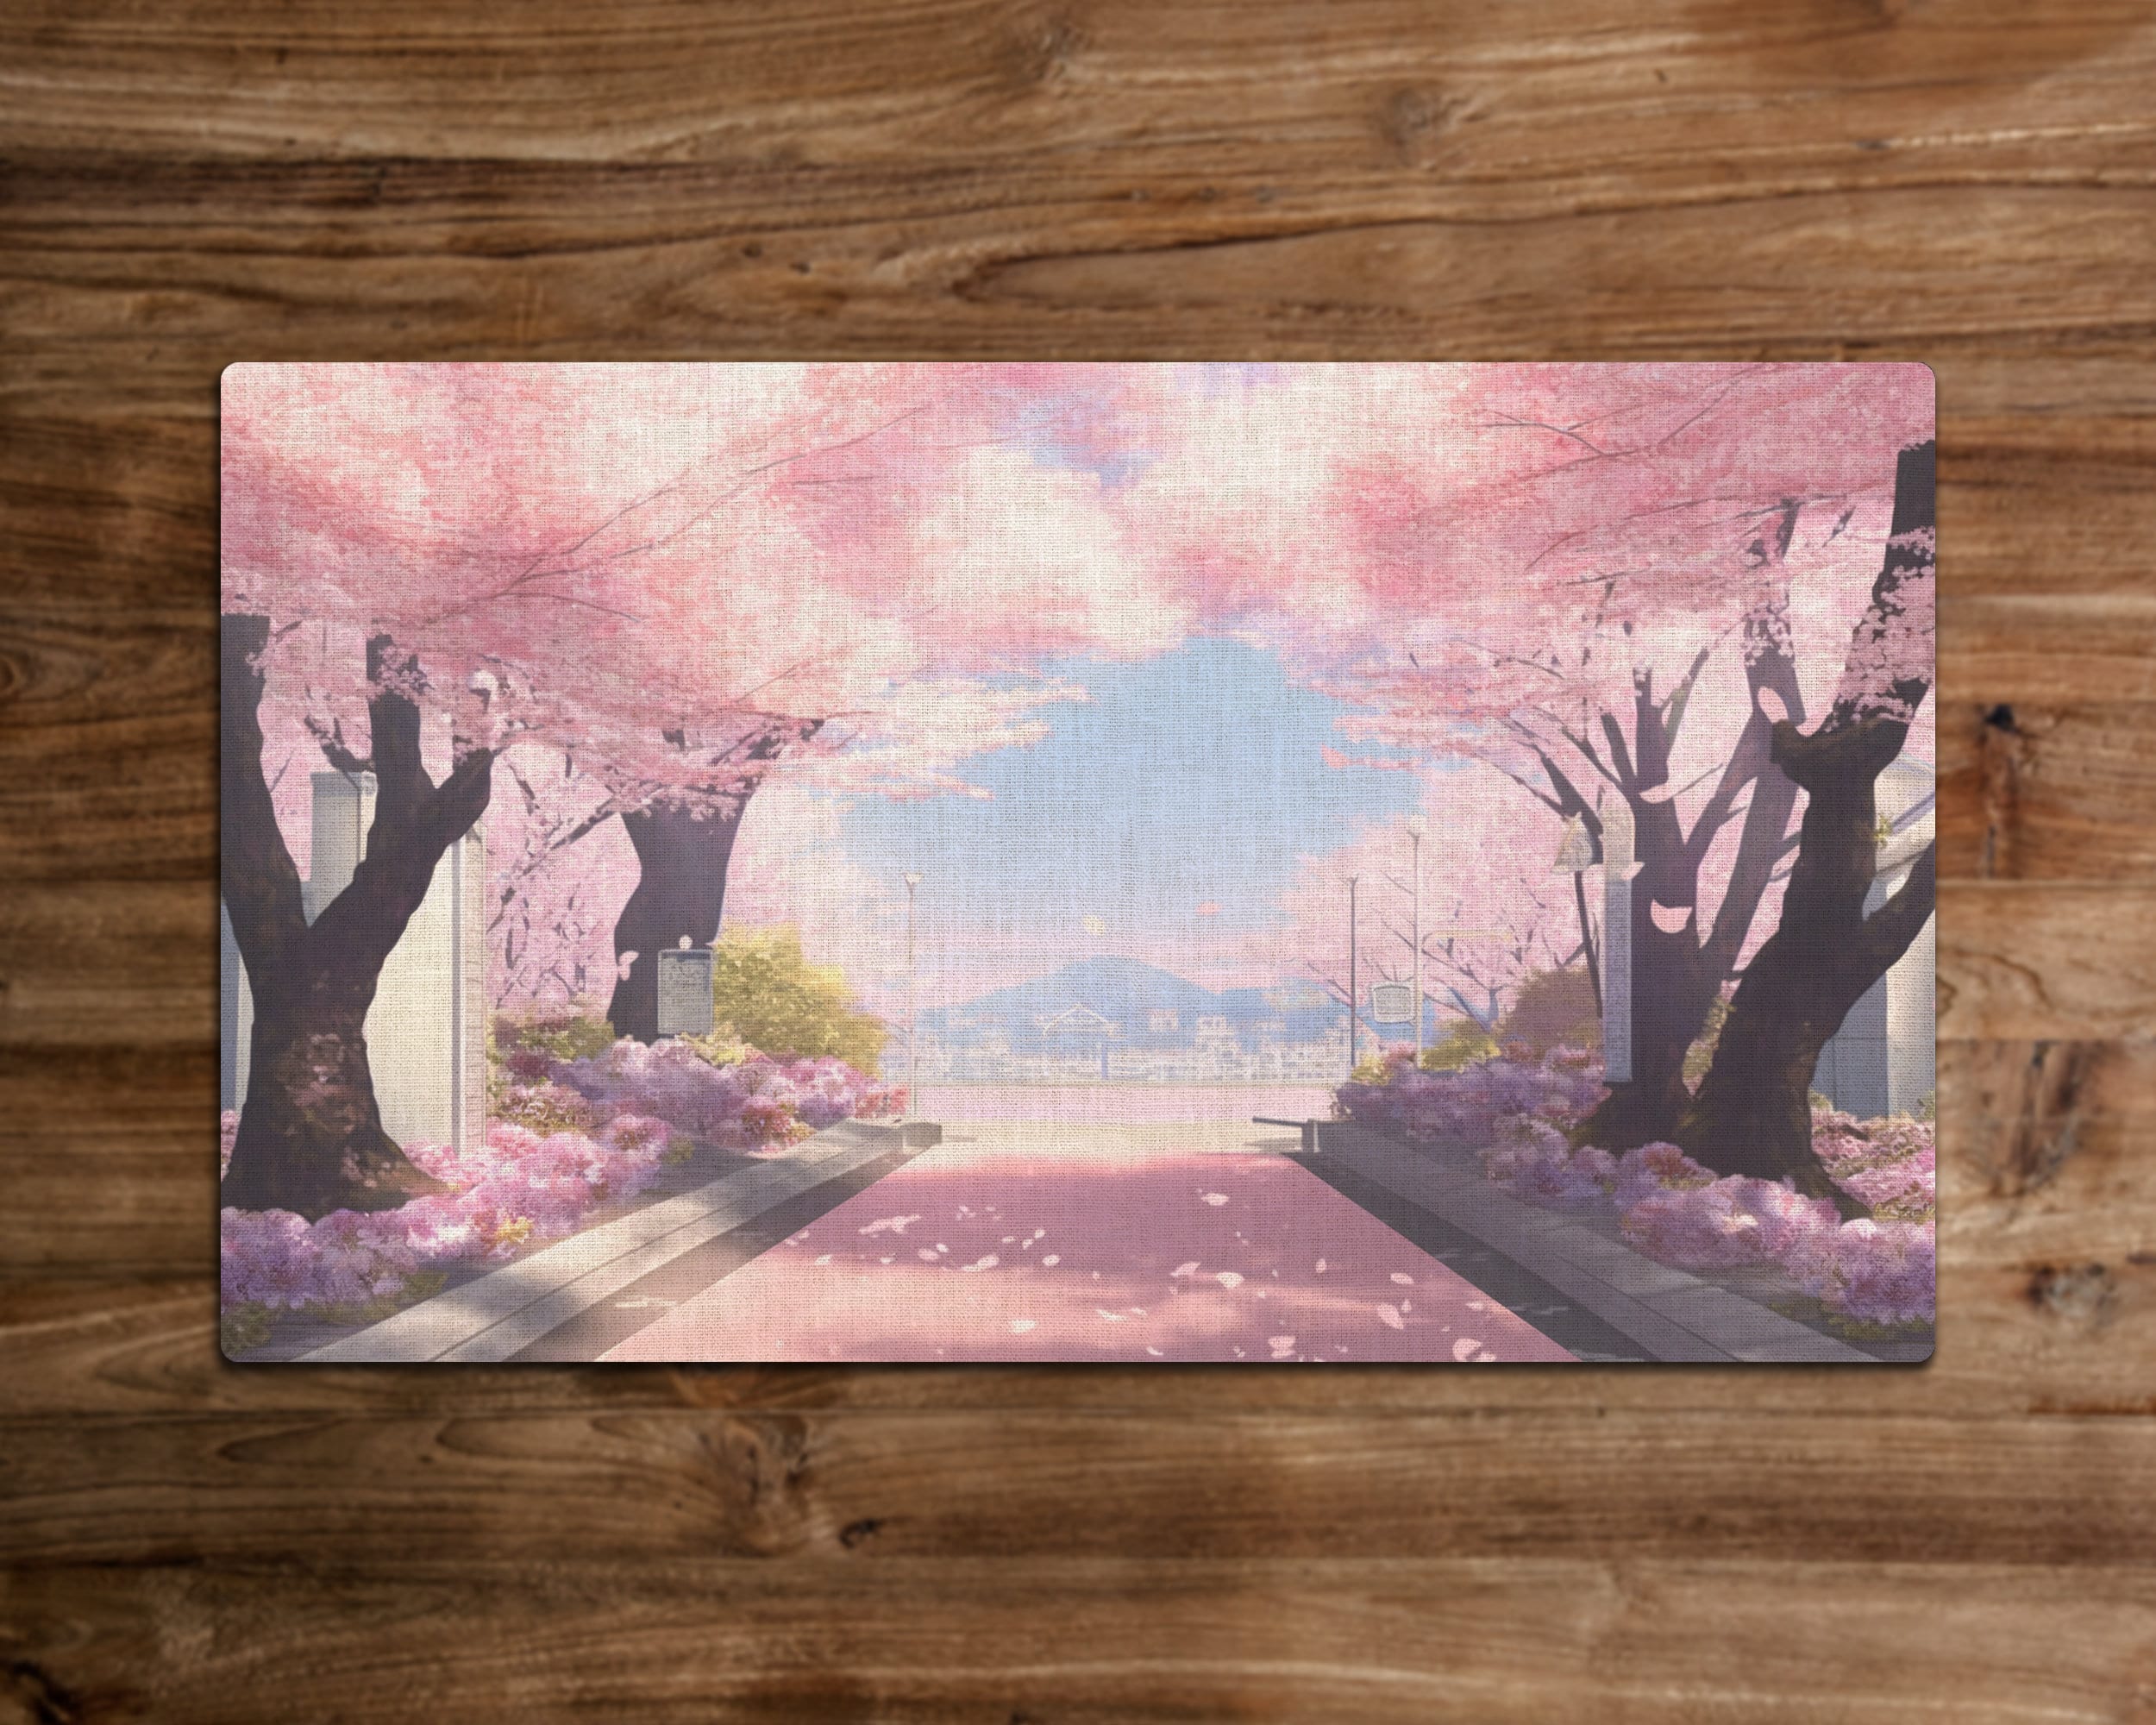 Pathway through the Cherry Blossom - MTG Playmat - 24 x 14 inches - MTG Gifts - Magic The Gathering Gifts - Stitched Playmat